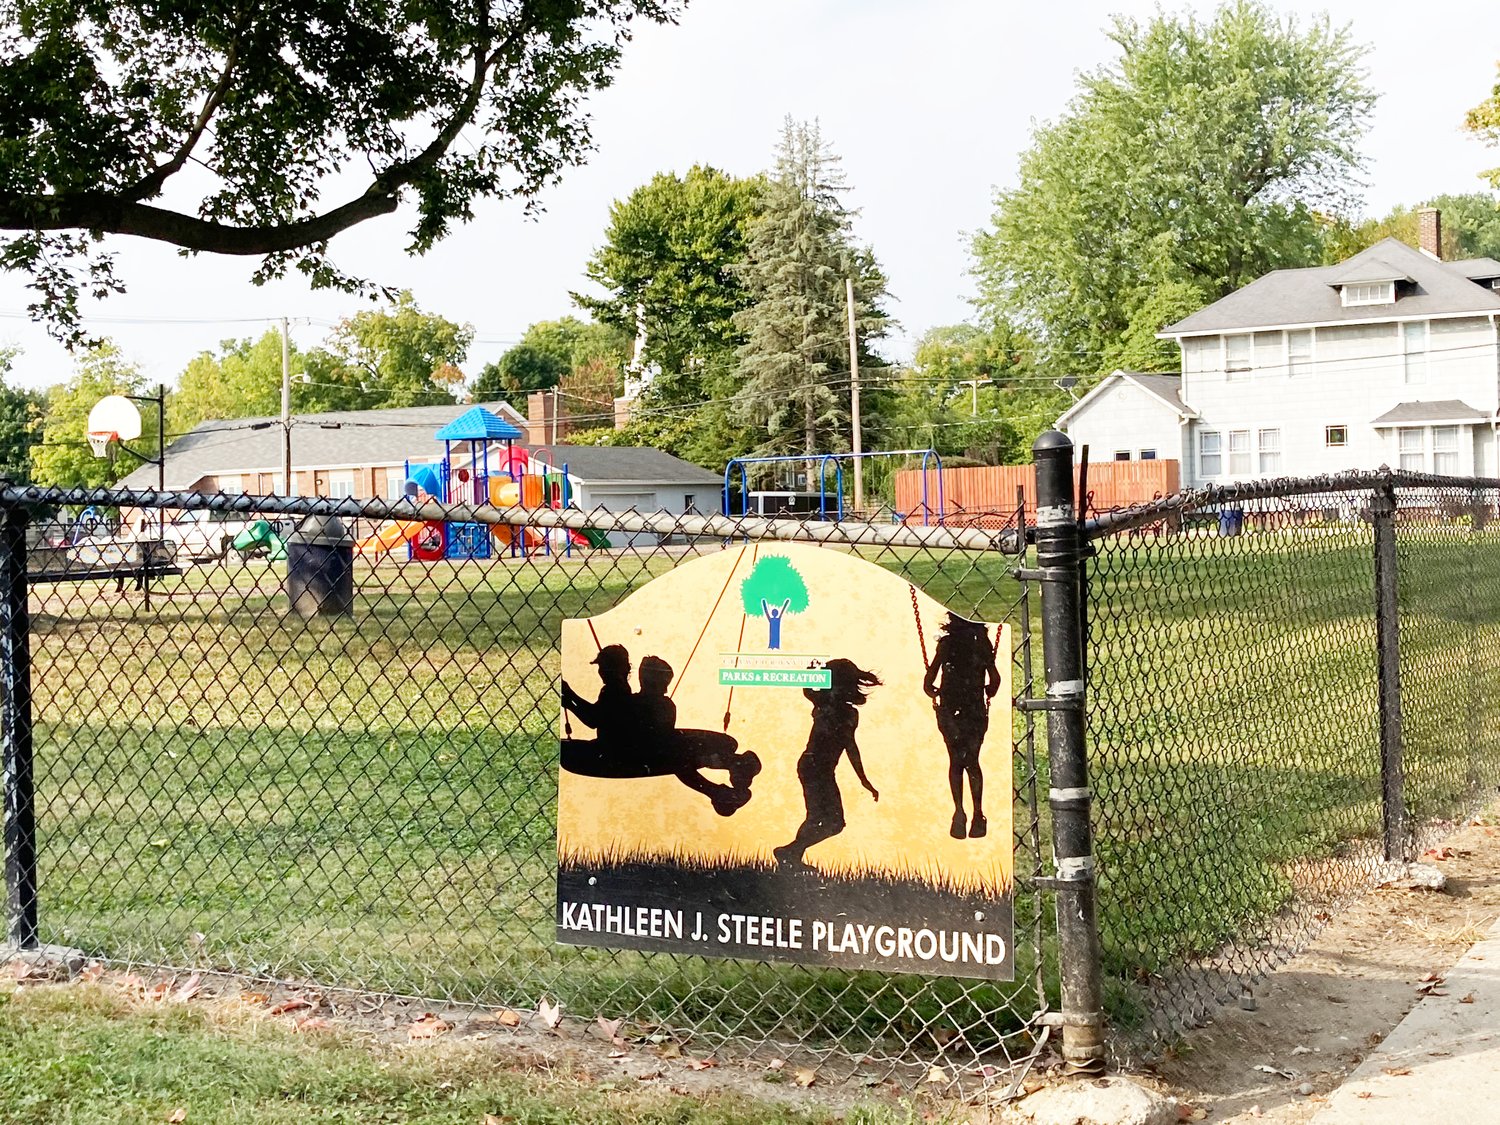 A Lafayette-based company has been hired to construct the redesign of Kathleen J. Steele Park, shown here Wednesday. The project is being funded by an anonymous donor through the Montgomery County Community Foundation.